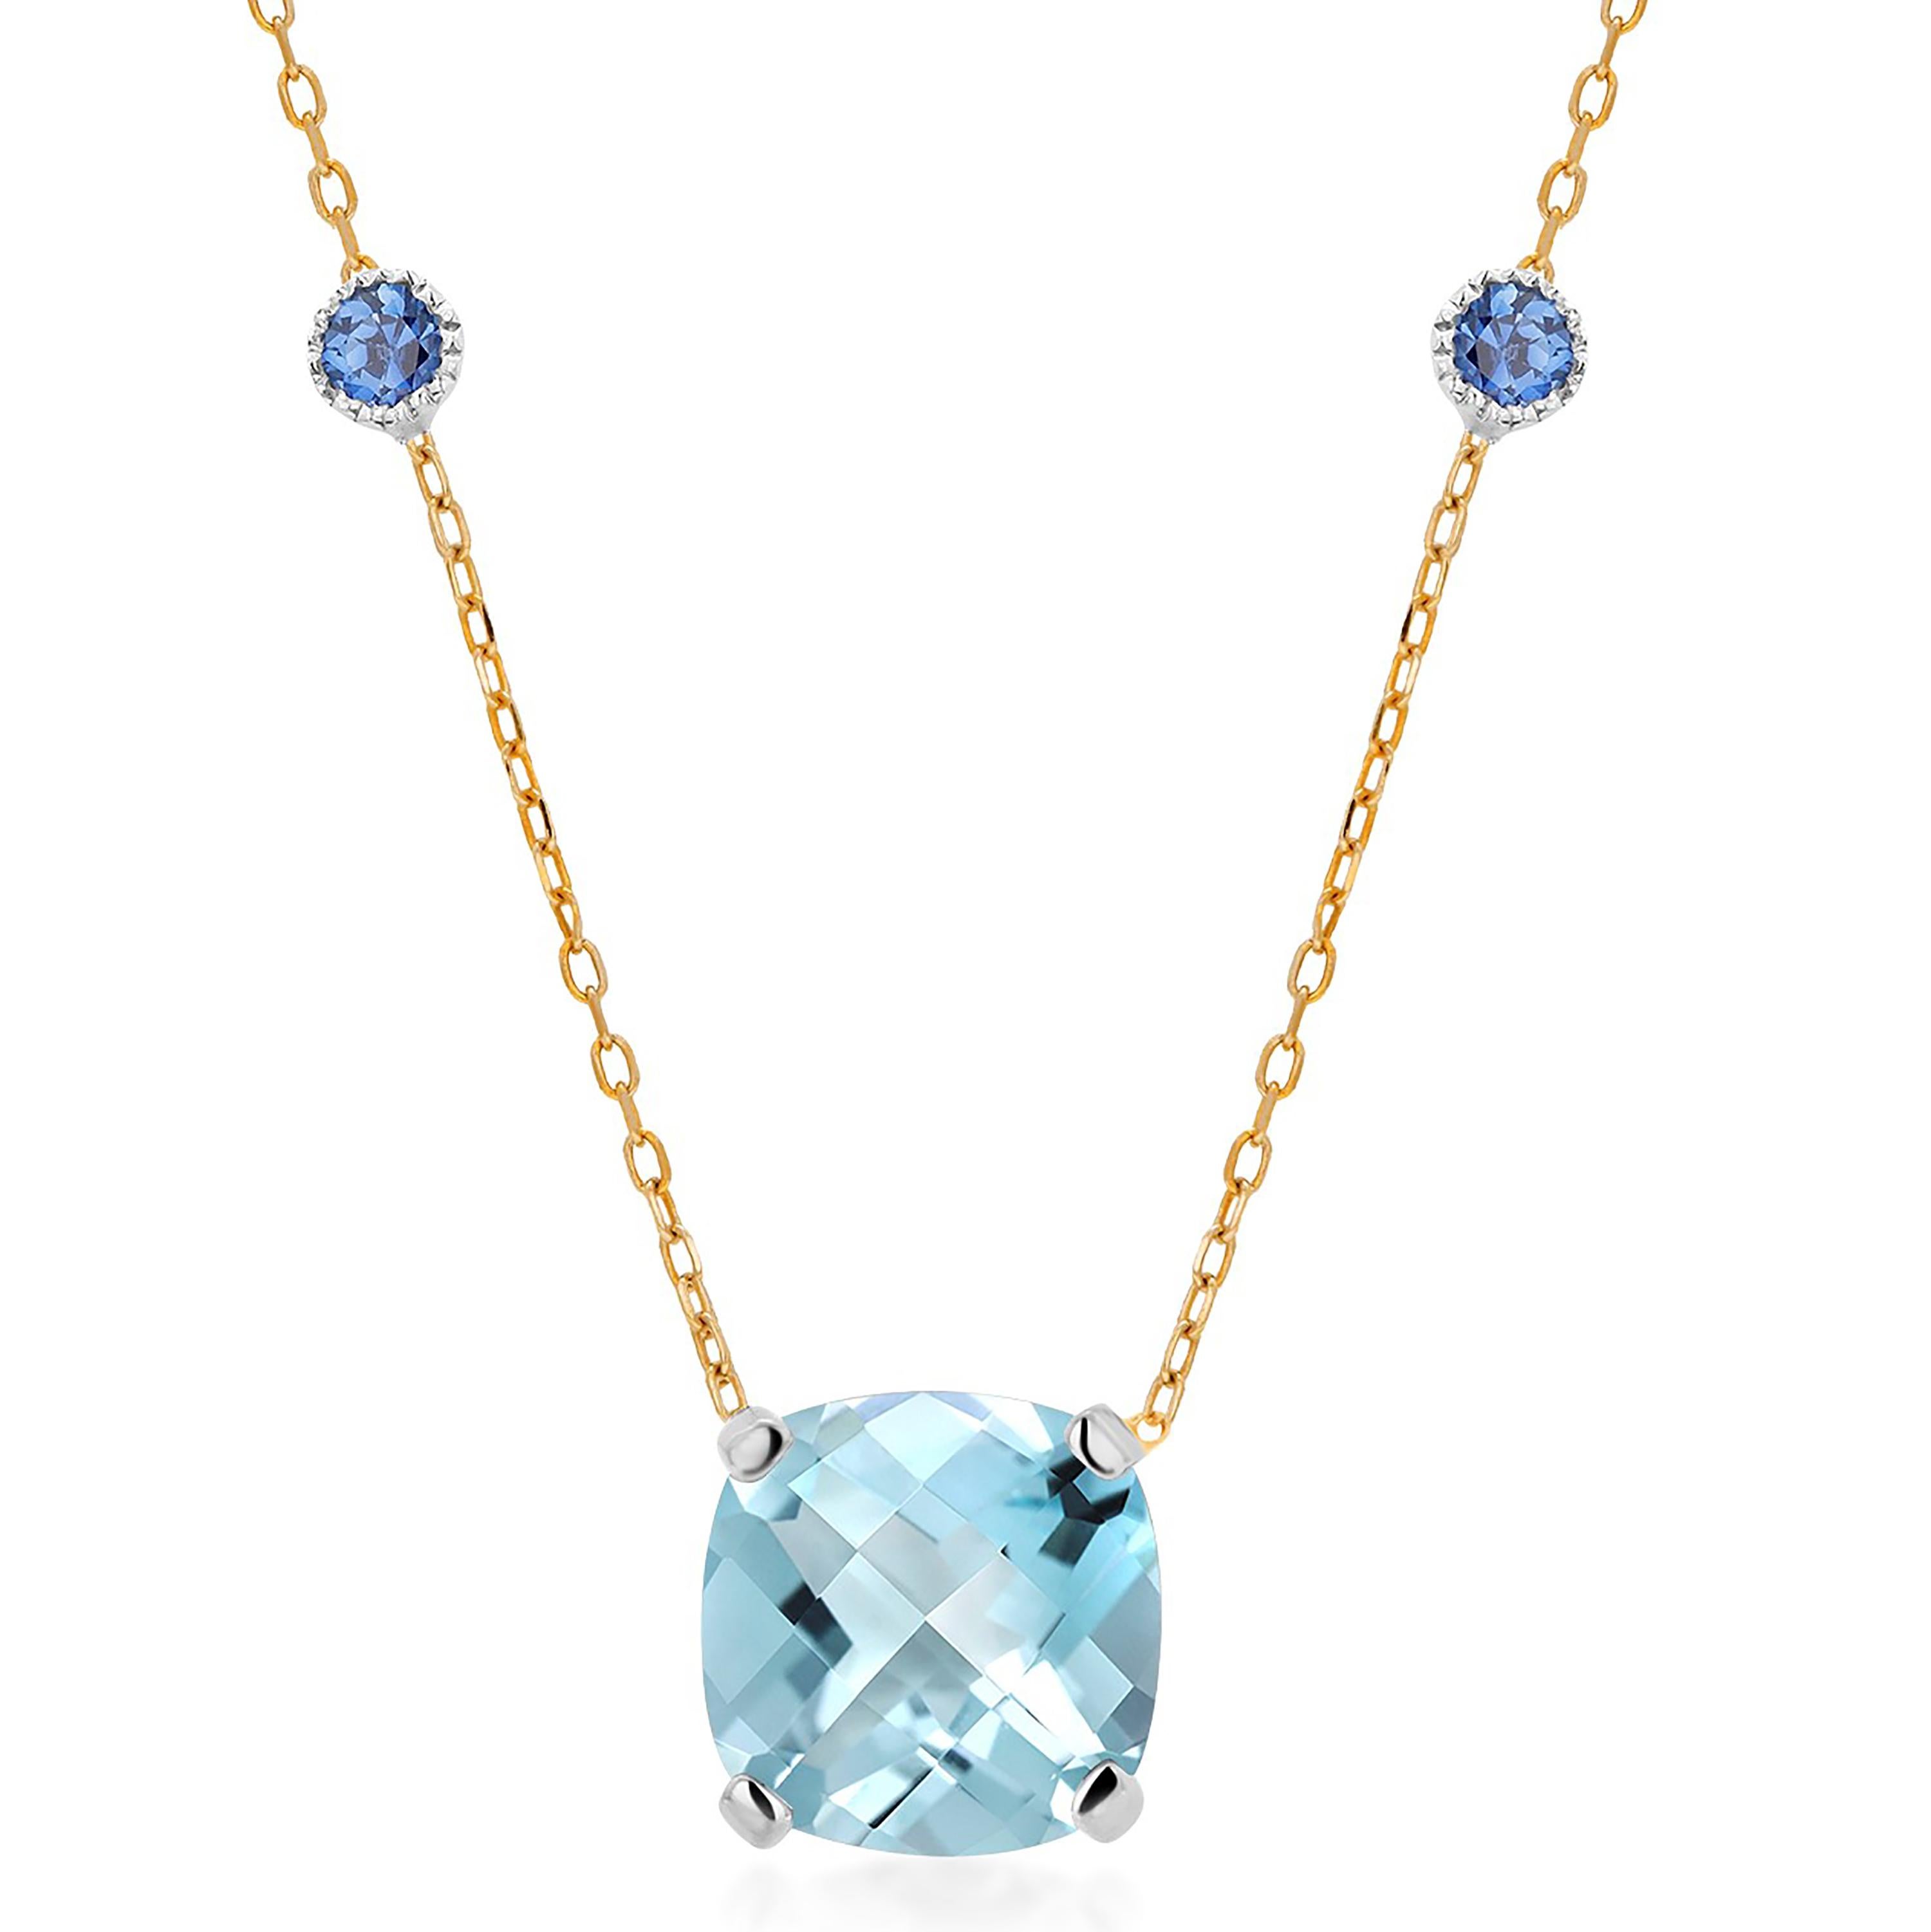 Antique Cushion Cut Cushion Shaped Aquamarine and Sapphire White and Yellow Gold Pendant Necklace